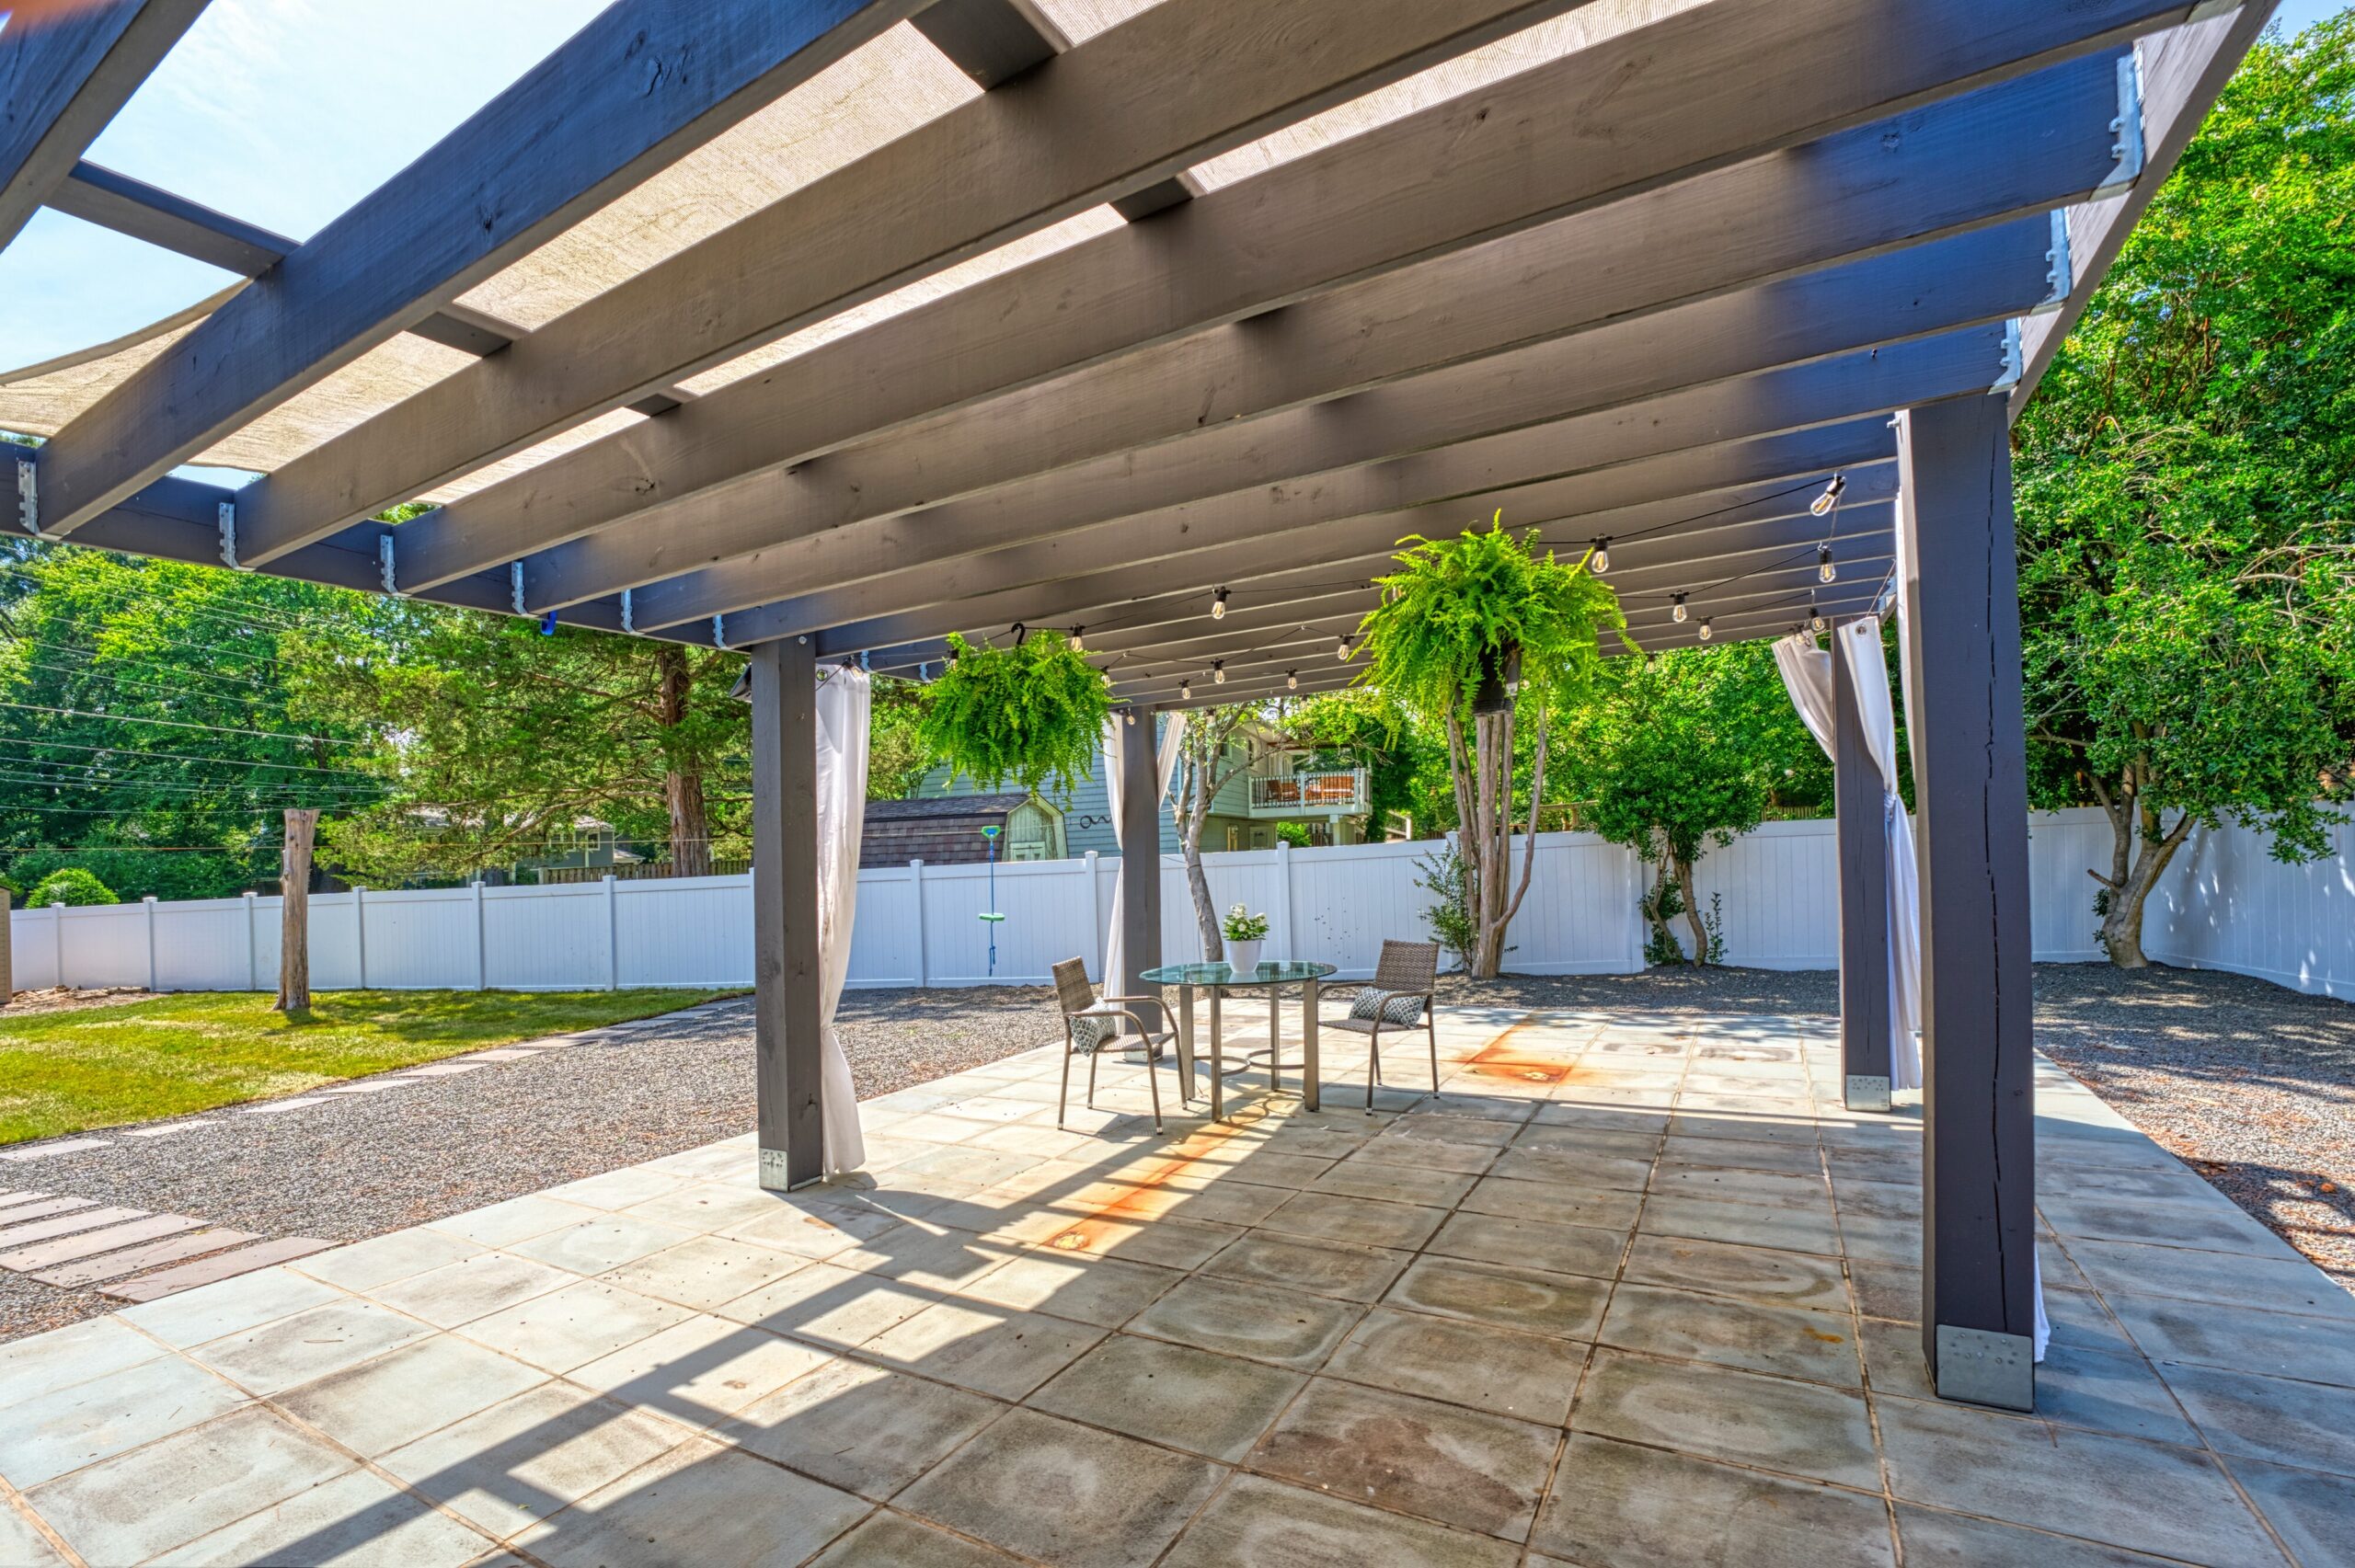 Professional exterior photo of 8320 Fort Hunt Rd, Alexandria - showing the view looking out from the back of the home through a large pergola on an even larger patio with lush landscaping in the background